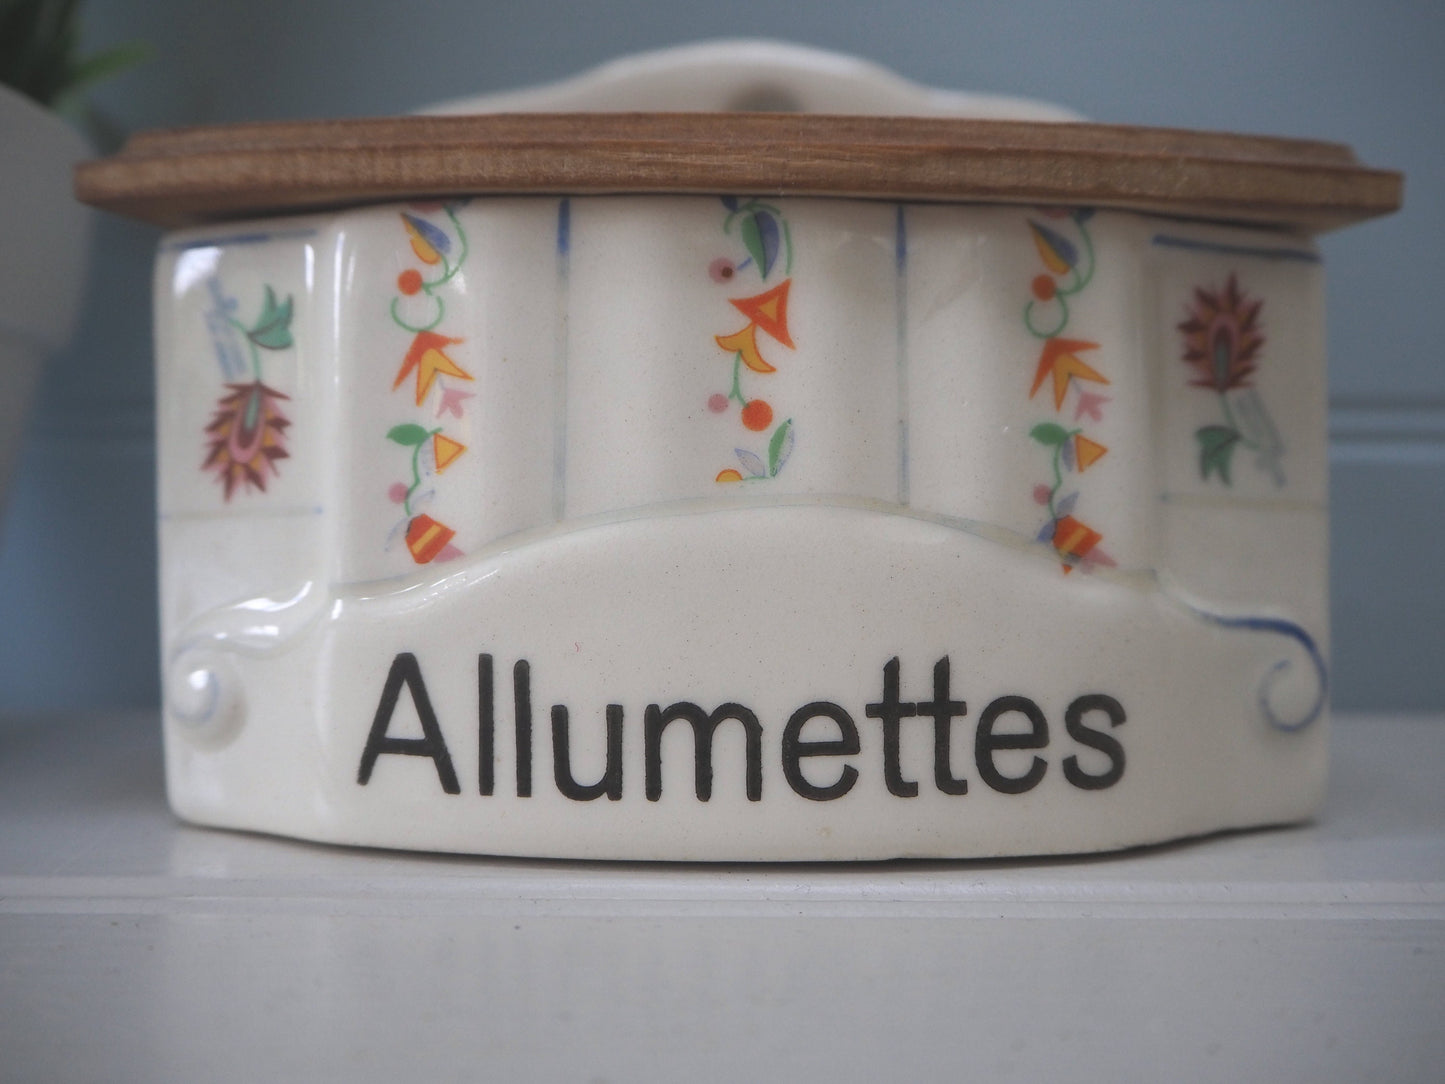 Vintage Allumettes Matches ceramic storage container with wooden lid Floral design